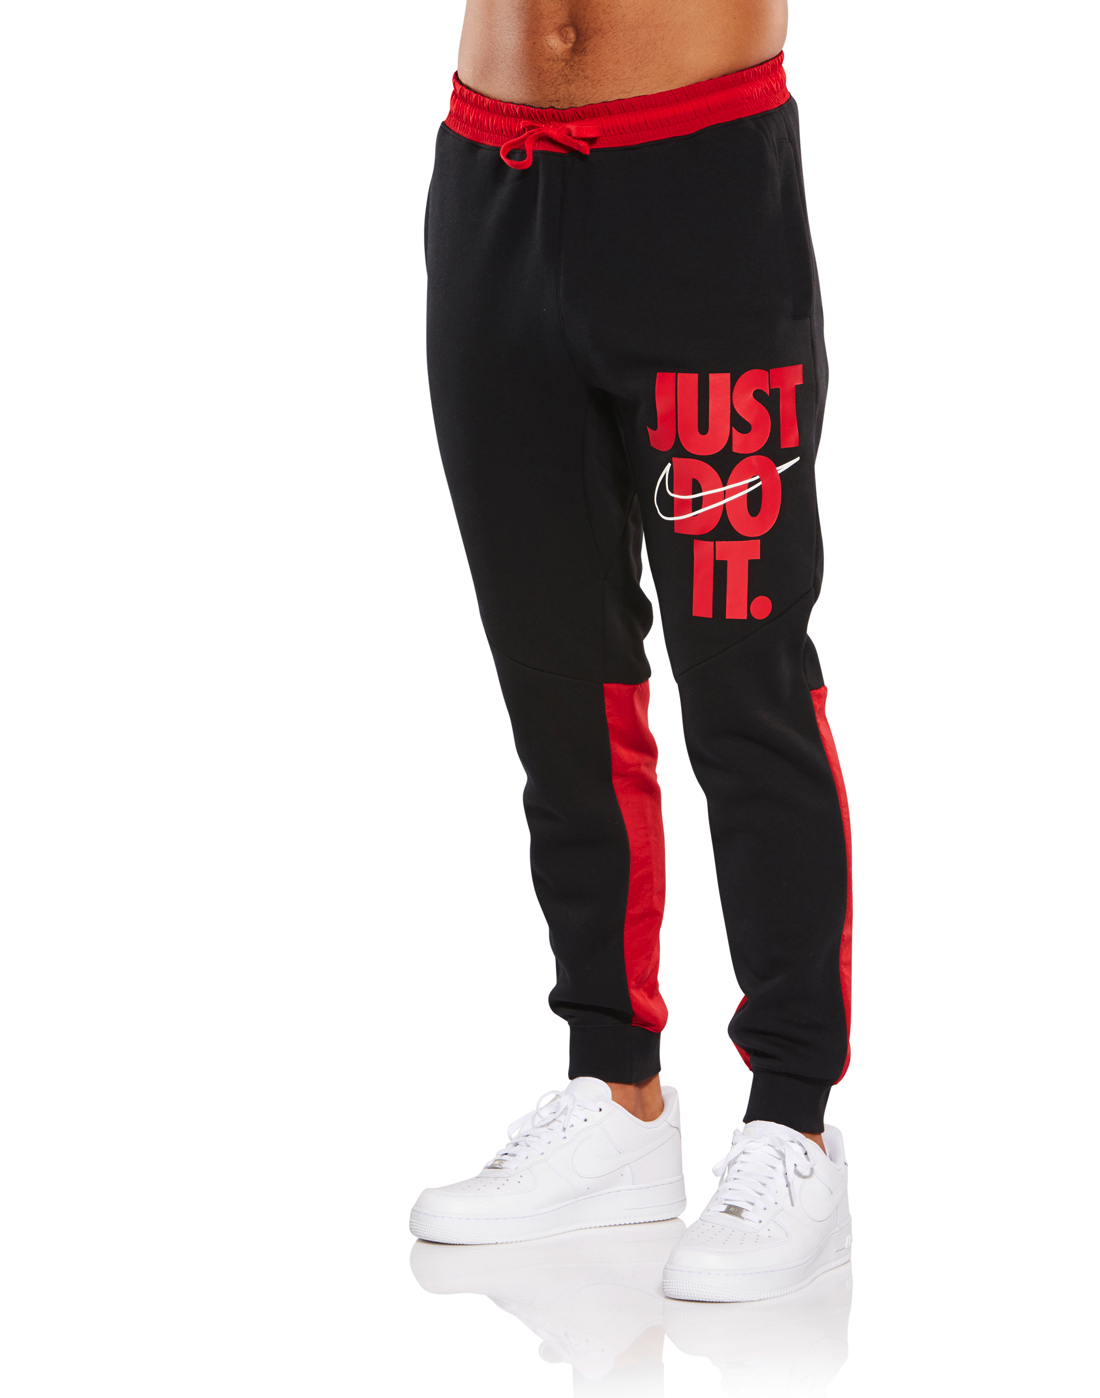 Men's Red & Black Nike Just Do It Joggers | Life Style Sports